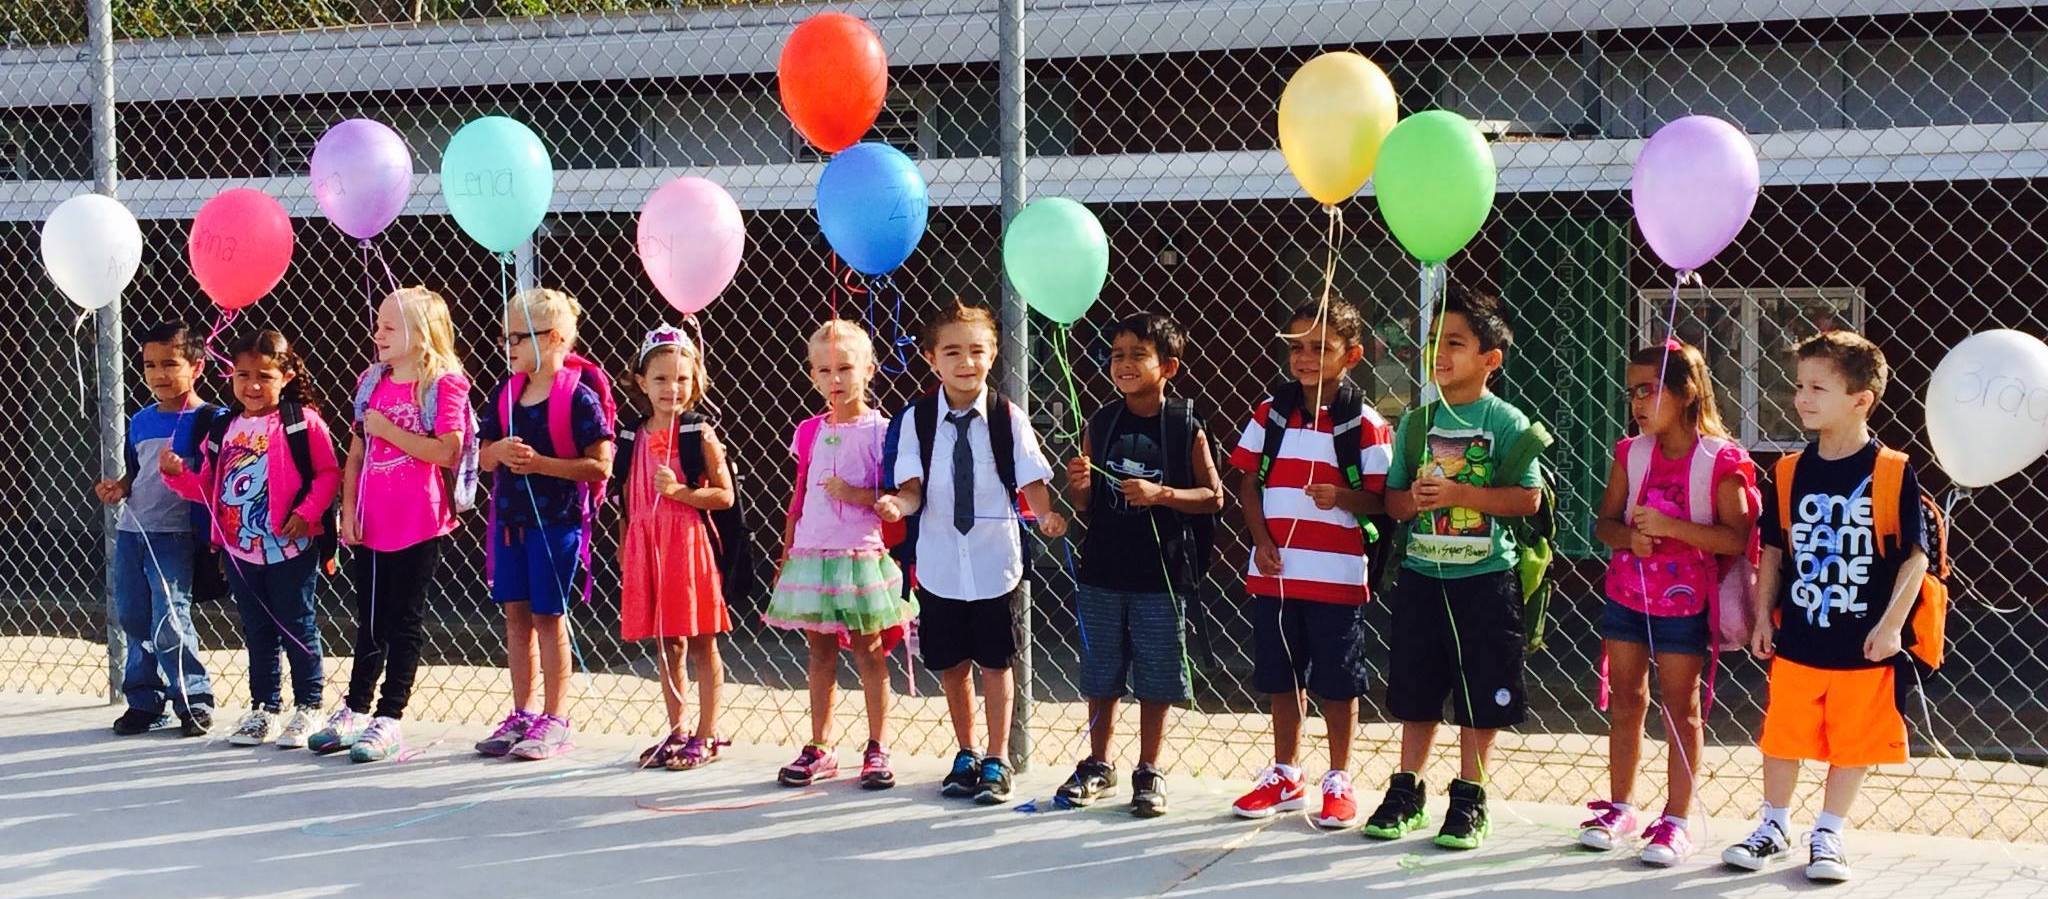 Kids holding colorful ballons